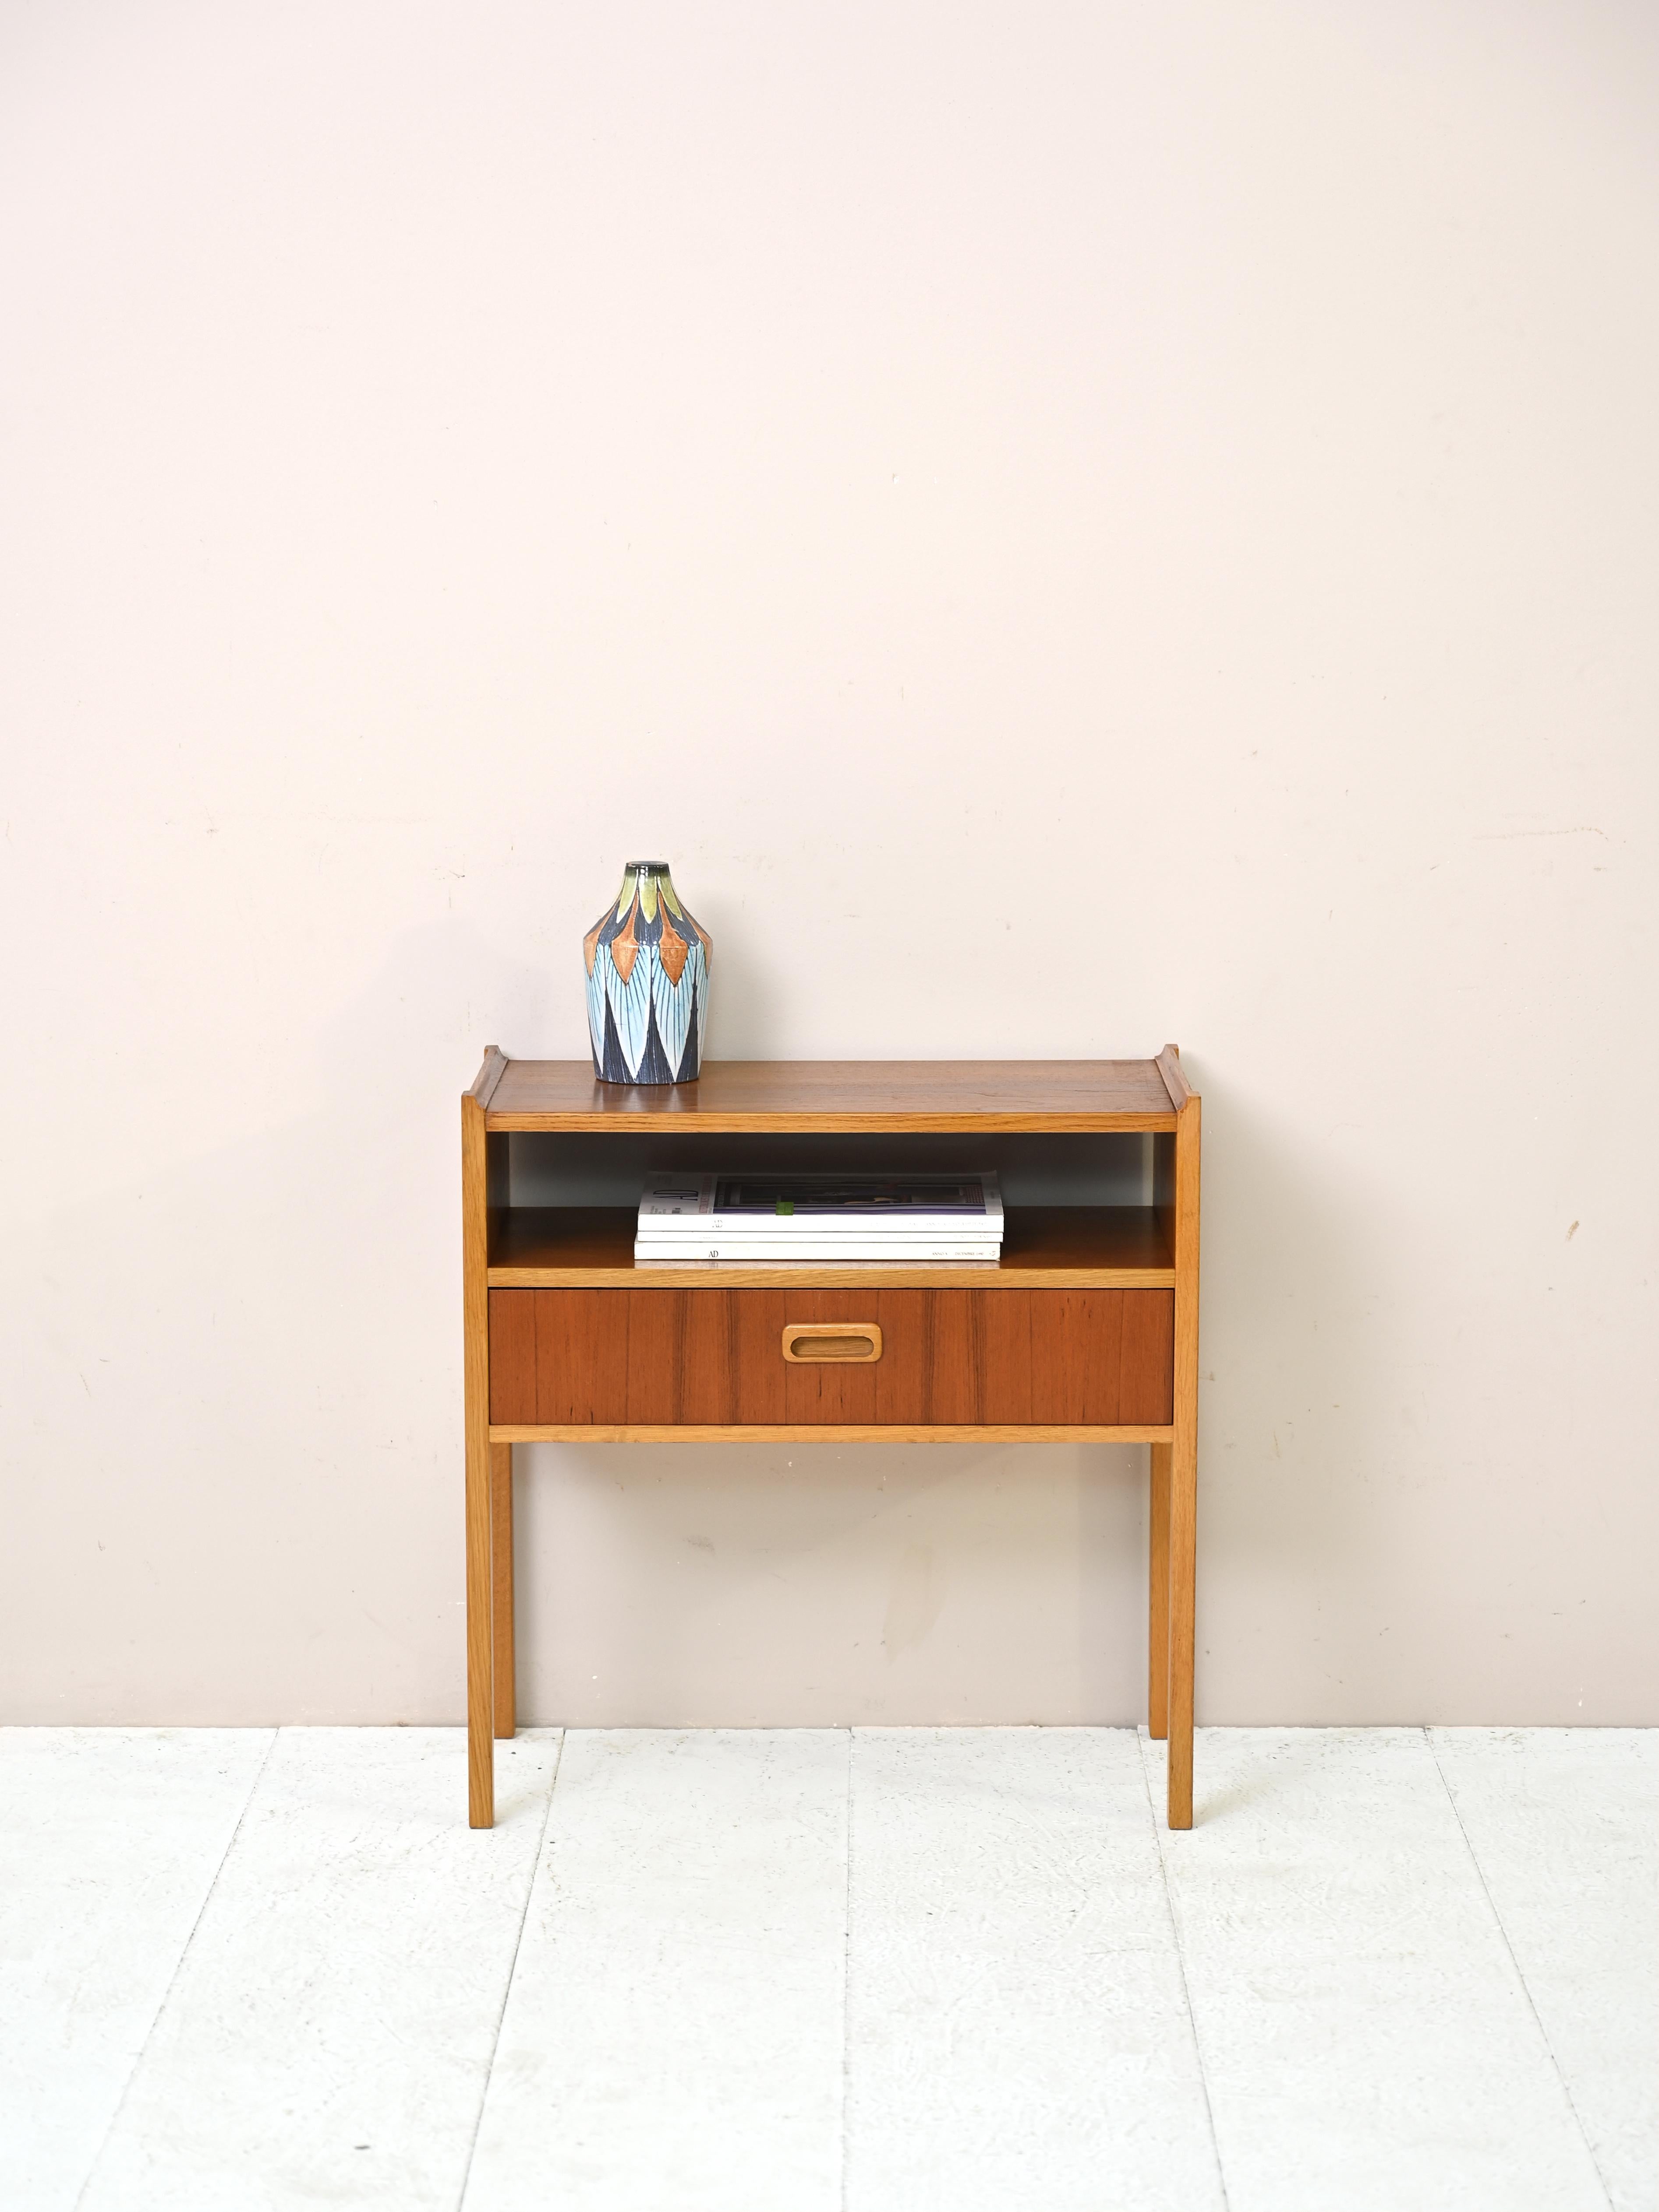 Scandinavian vintage teak nightstand. 

Regular, tapered lines for this 1950s nightstand with timeless beauty.

Equipped with a drawer and a useful shelf, it will be a must-have addition to the bedroom.

Good condition. May show some signs of